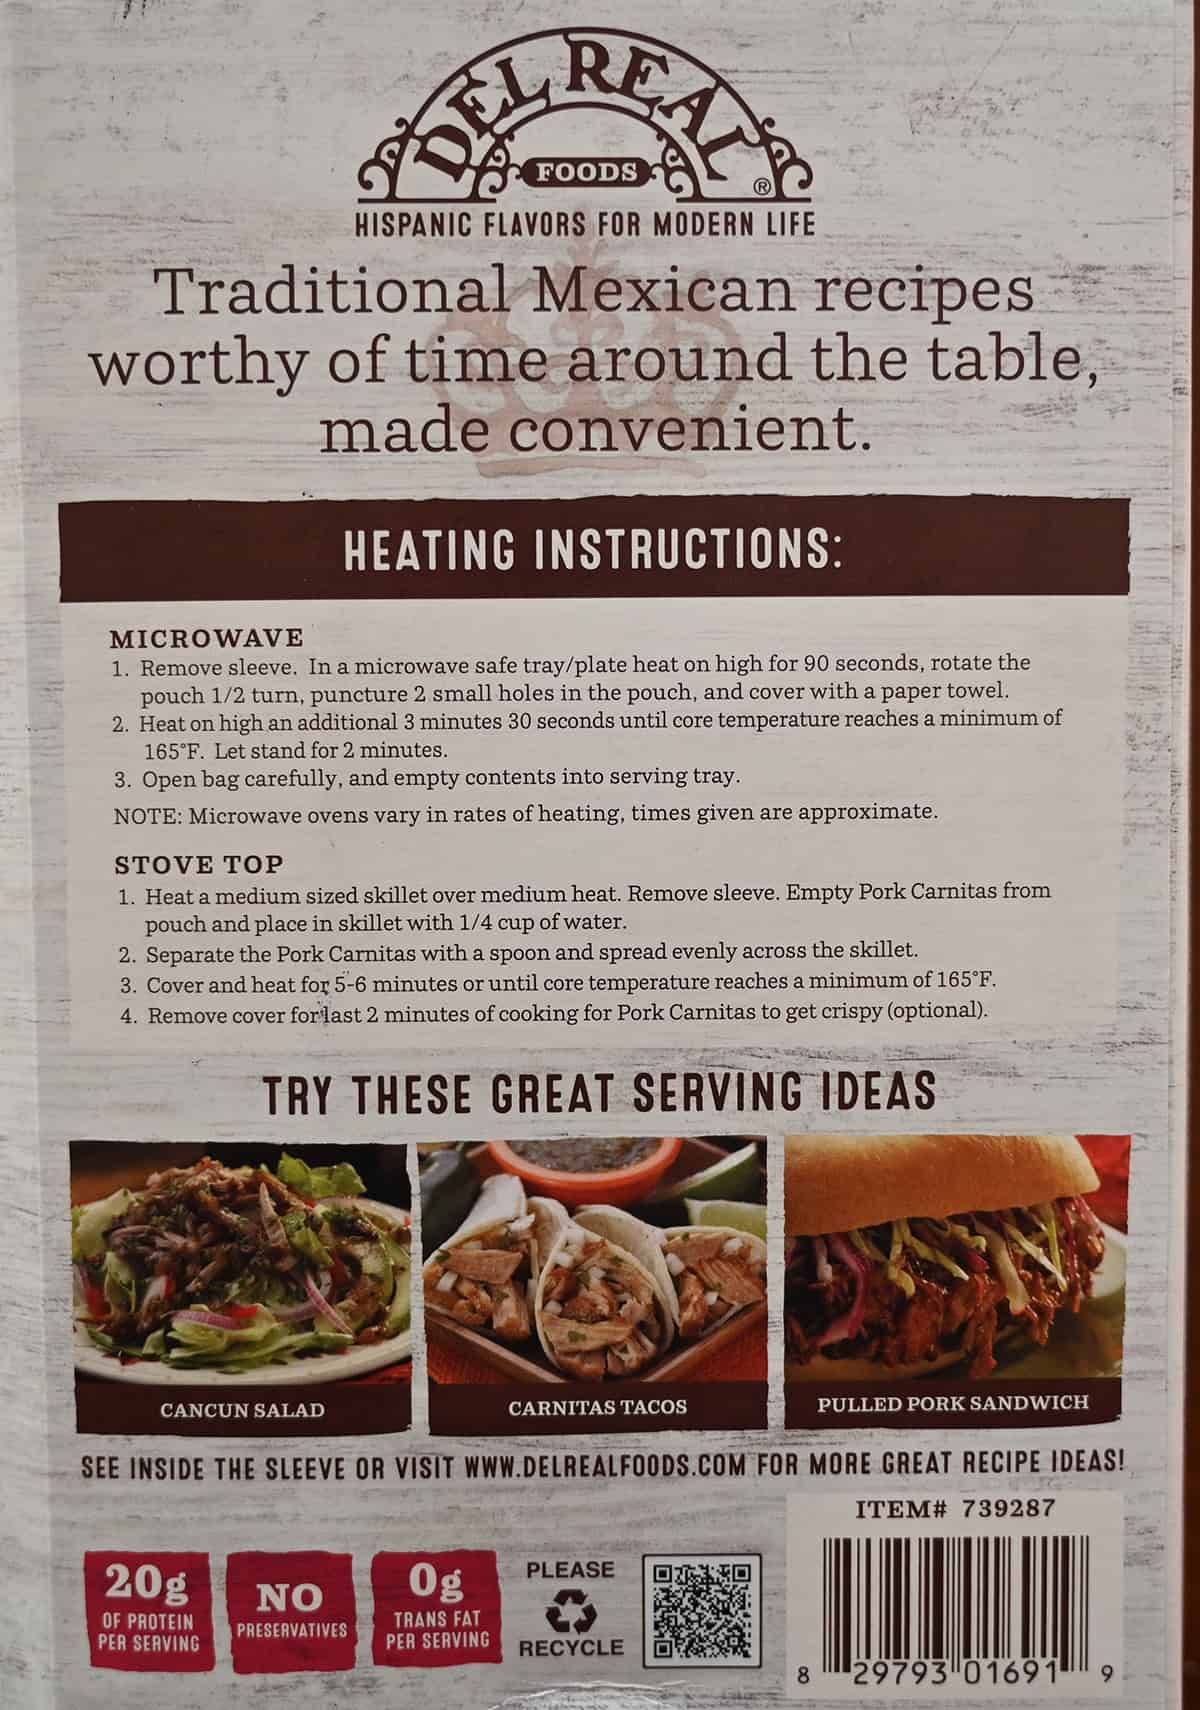 Image of the back of the package of the pork carnitas showing heating instructions and pictures on how to use the carnitas.